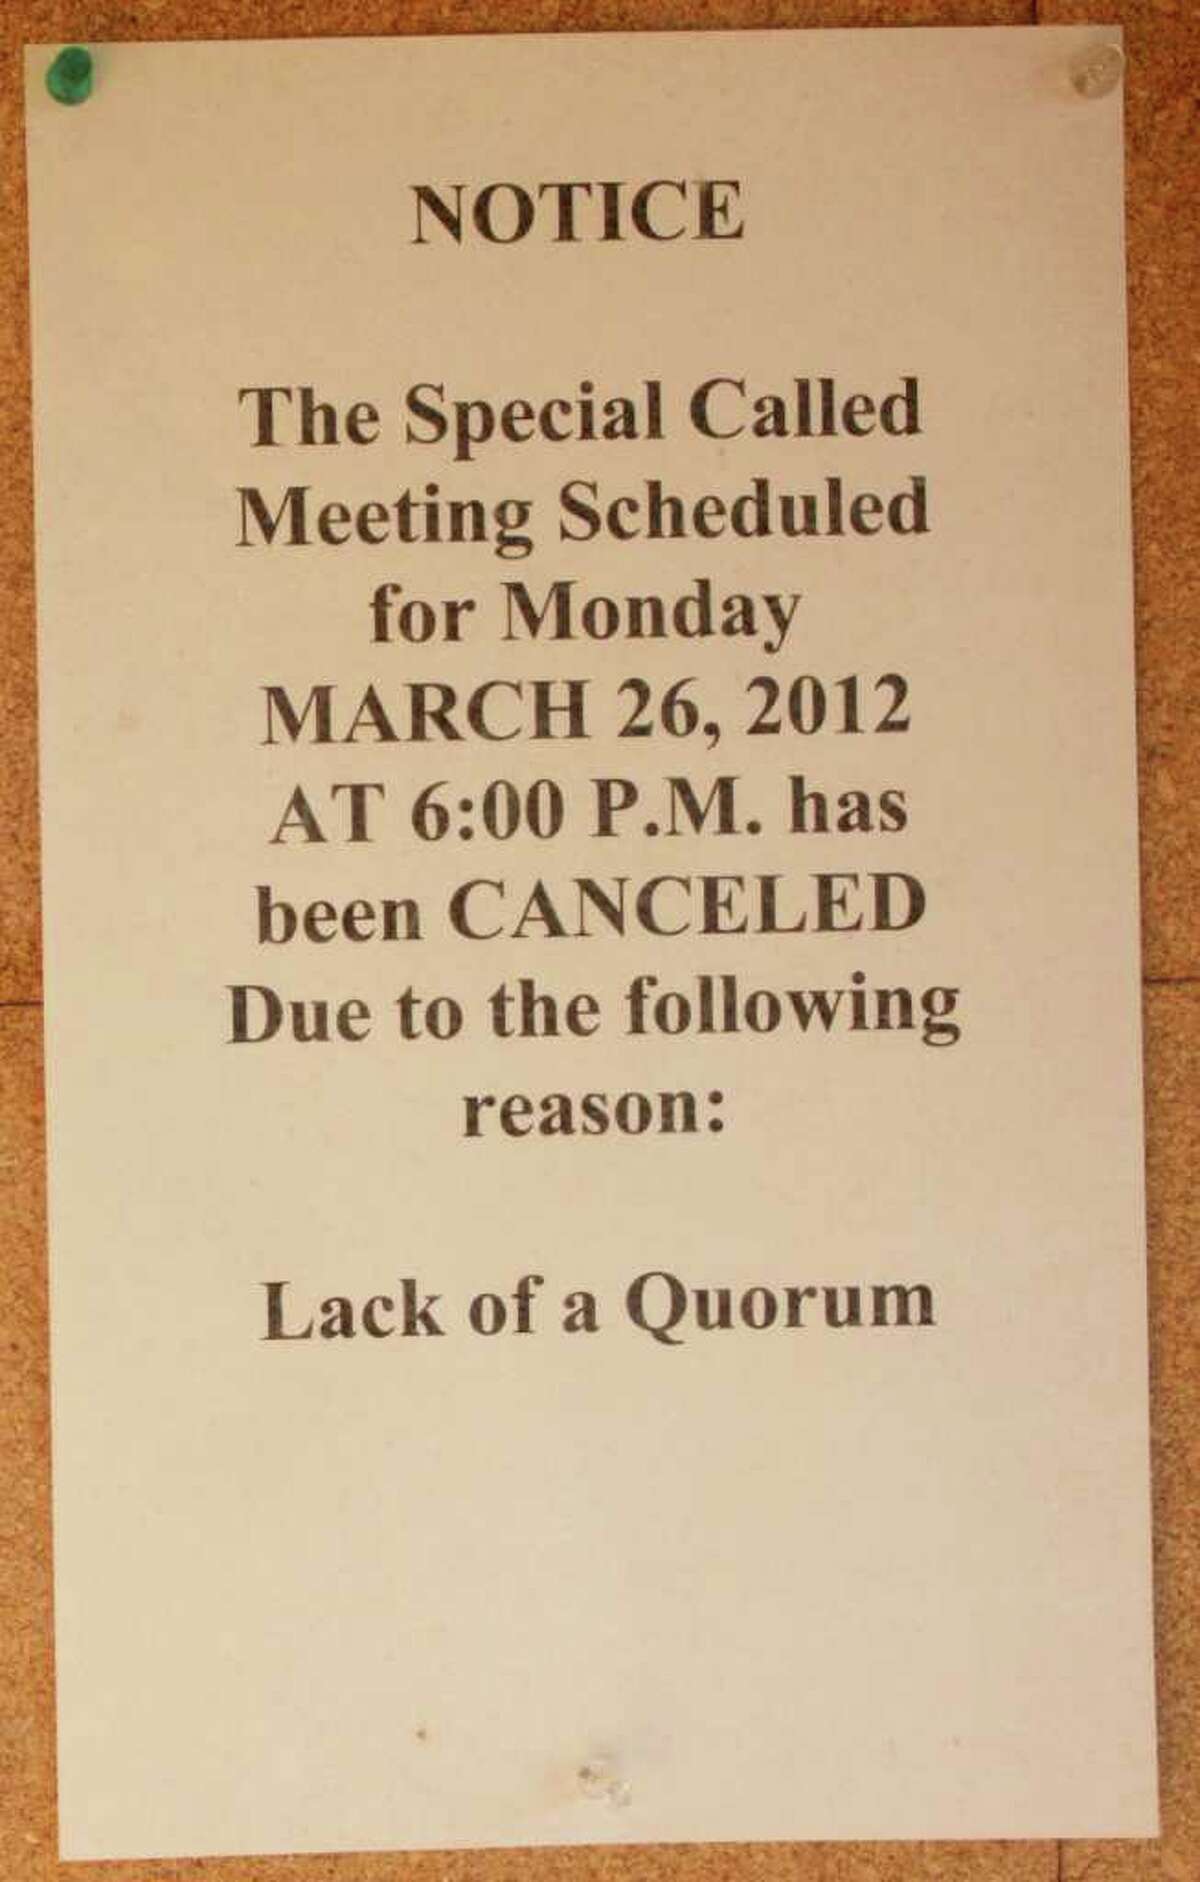 Silsbee residents who planned to attend a Special Meeting of the silsbee City Council were met with this sign Monday evening, informing them the meeting had been cancelled due to a lack of a quorum.